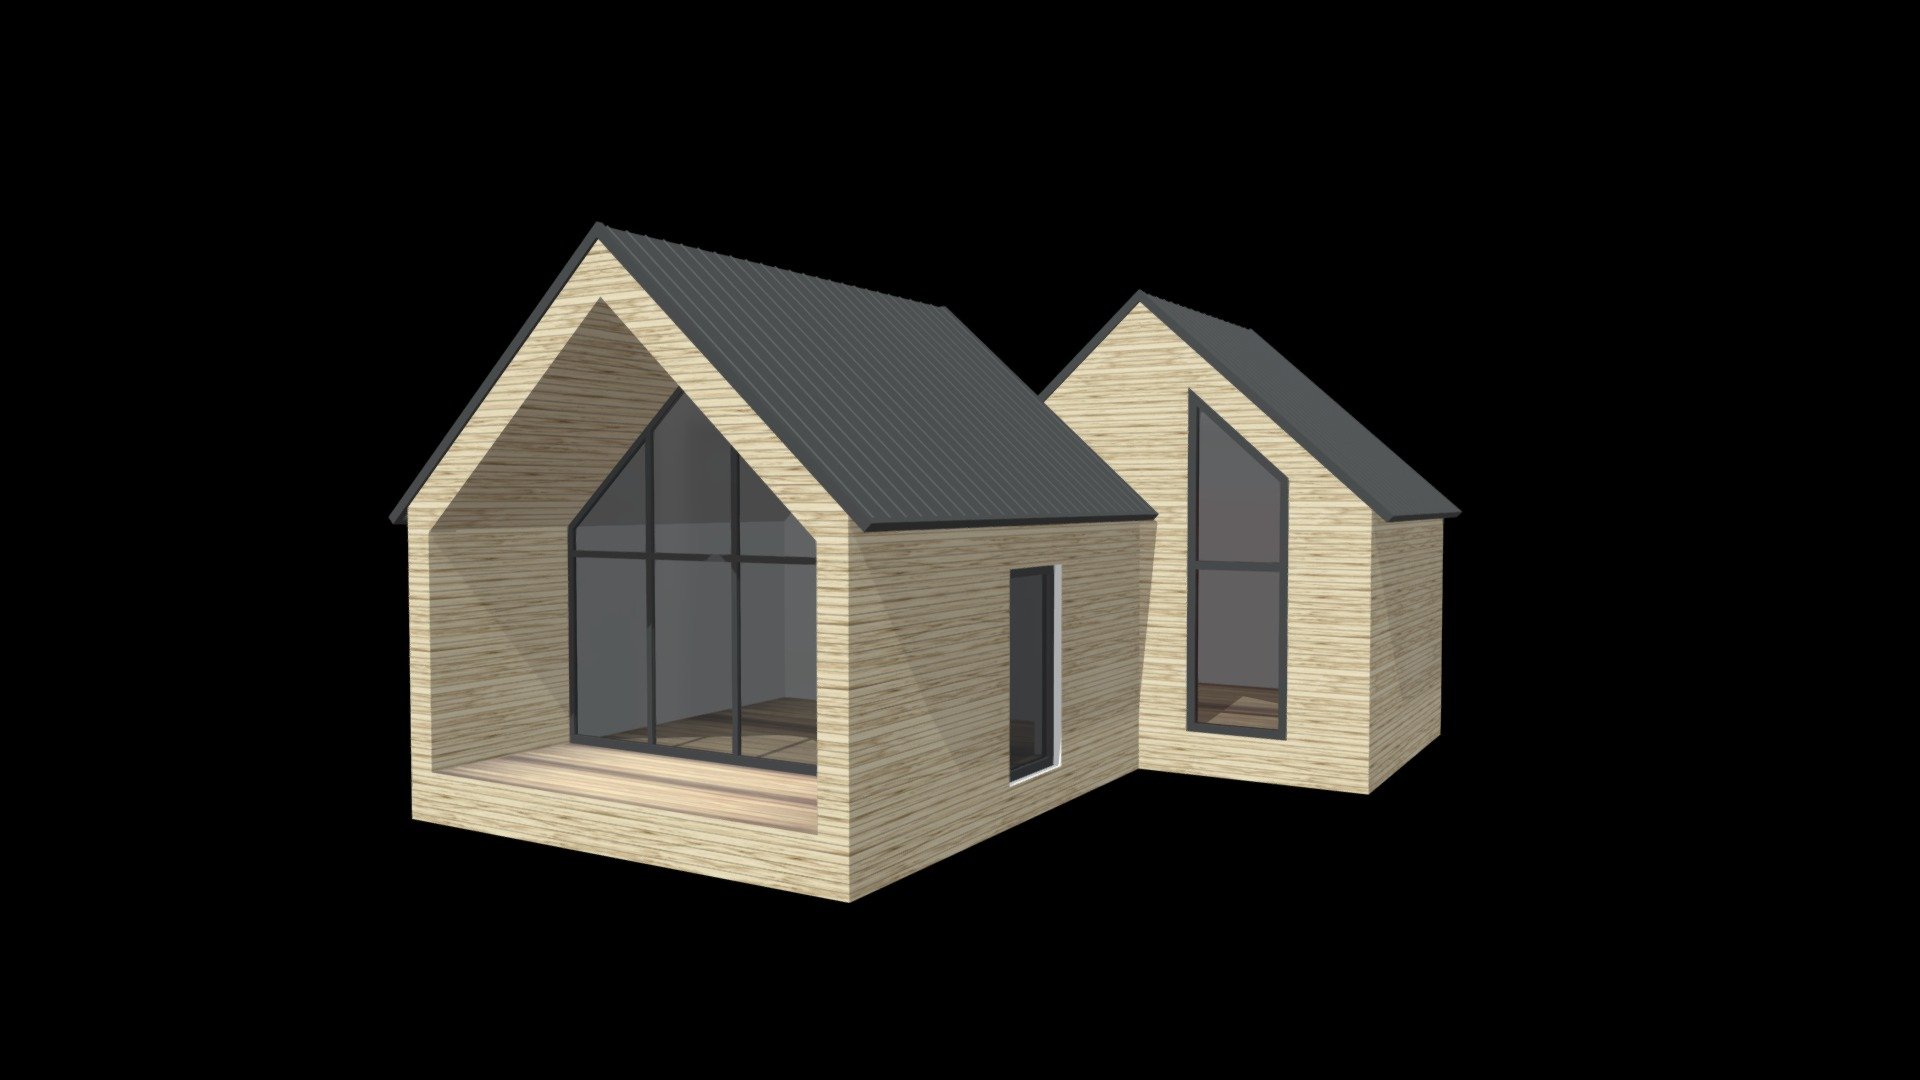 House Visualization 4

Size: 8.154m x 10.272m x 5.6m (wikihouse blocks only)

Built up area: 55.84m2 (wikihouse blocks only)

Wall size is M.

Floor/End size is M.

License: Attribution-ShareAlike 4.0 International https://www.wikihouse.cc/ - House Visualization 4 - Download Free 3D model by zewaho 3d model